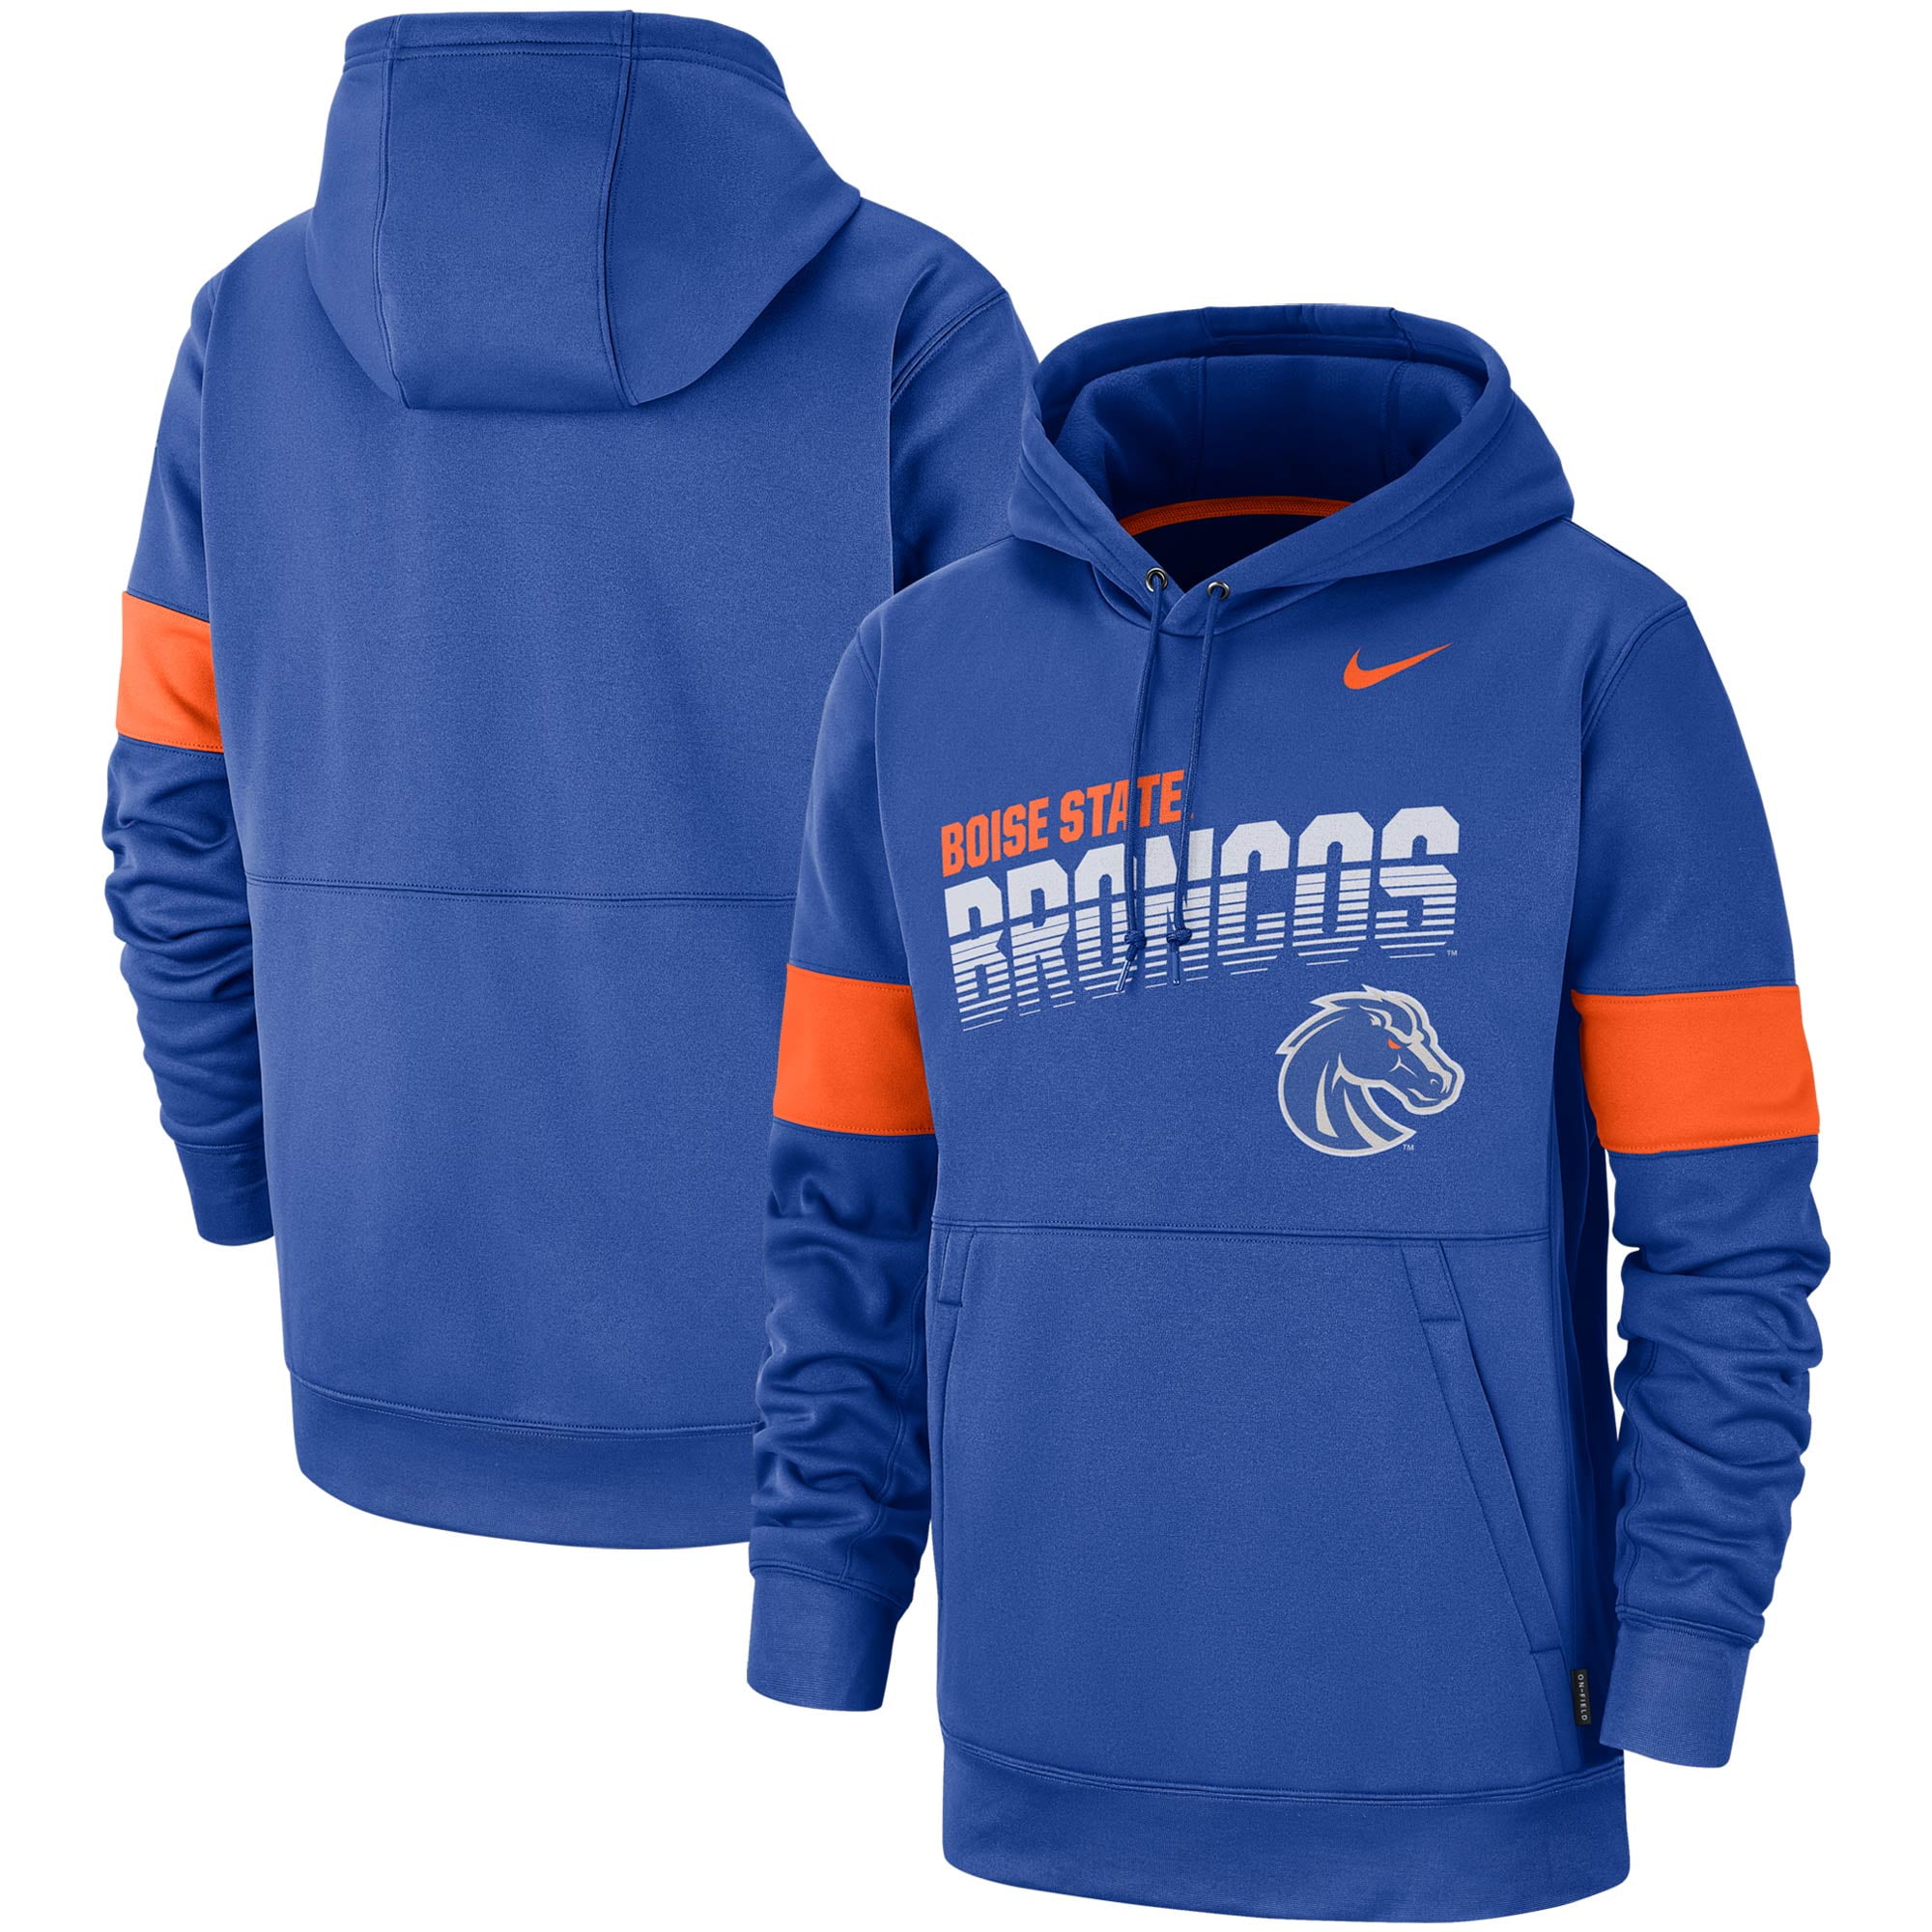 Outerstuff NCAA Youth Boys Boise State Bronocos Pullover Hoodie 